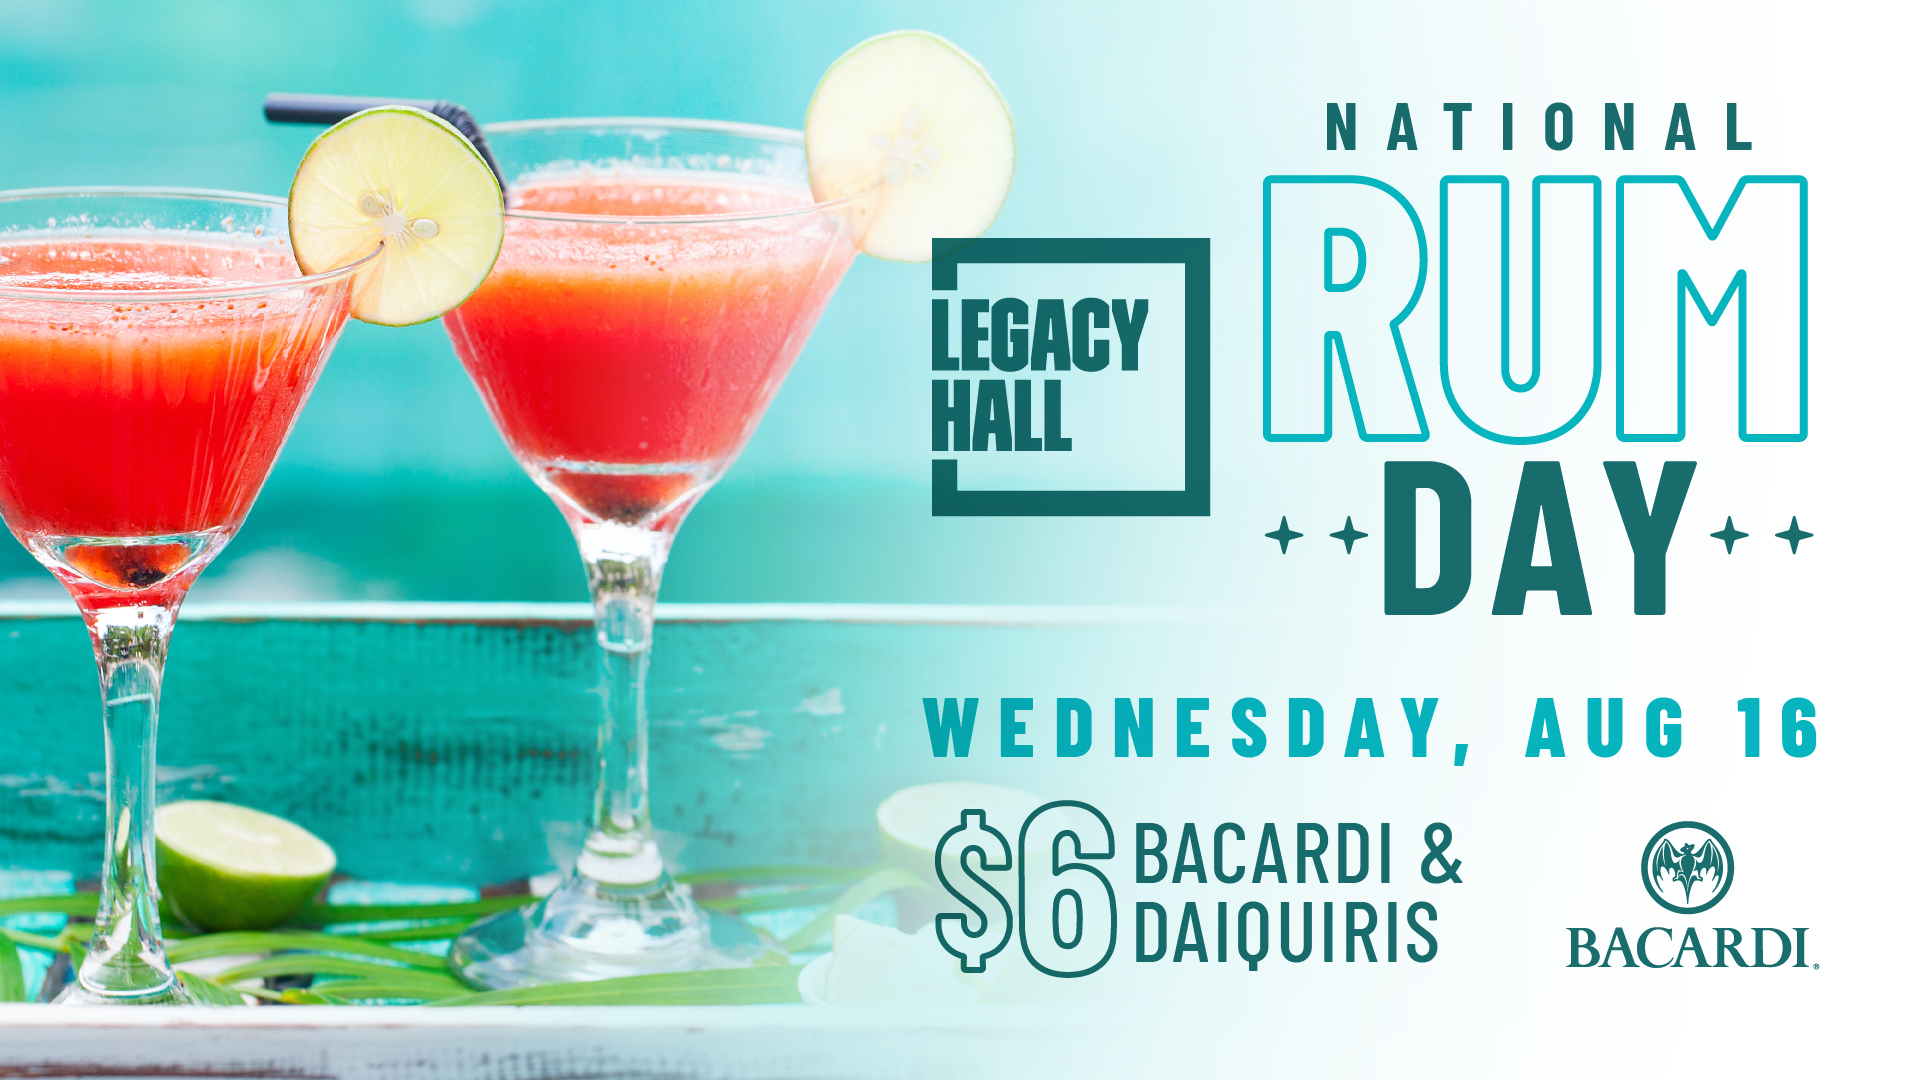 Promo image of National Rum Day